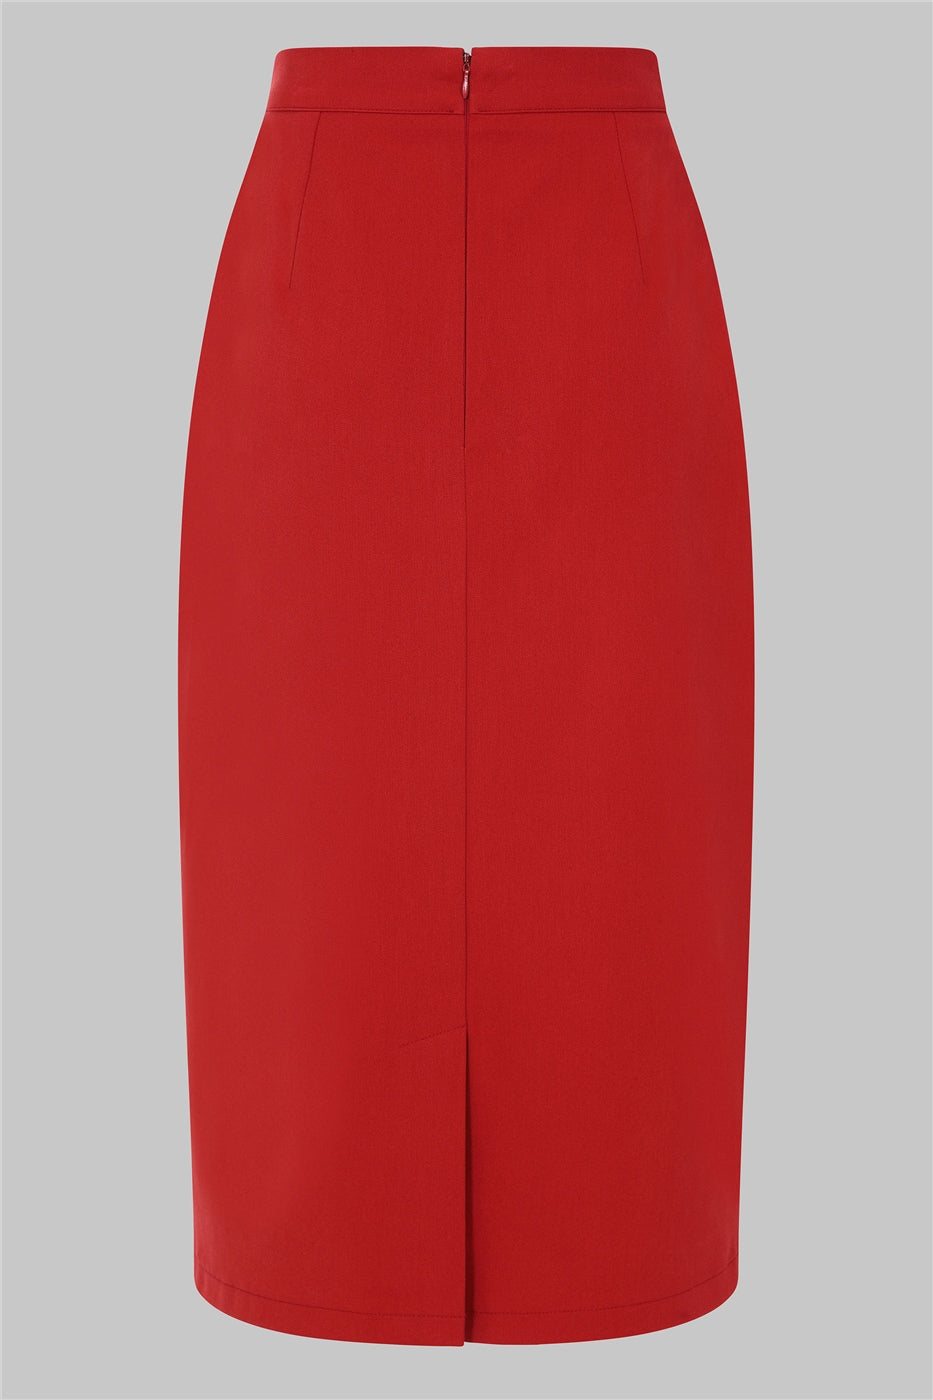 The back of the red Posey skirt by Collectif showing the zip closure centre back and slit in the middle at the bottom